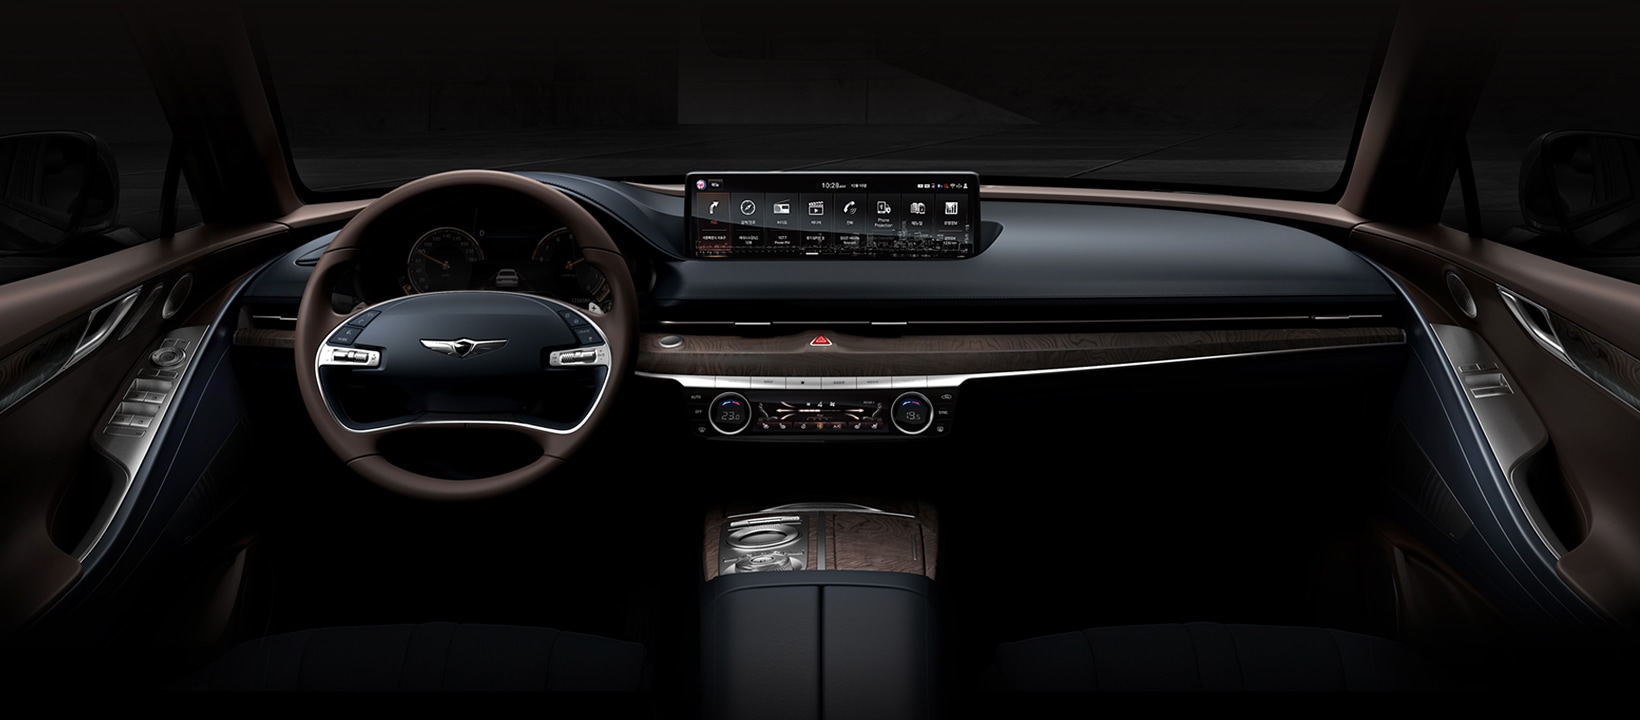 A spacious and calm car interior with luxurious black and brown leather and an oblong digital display in the centre